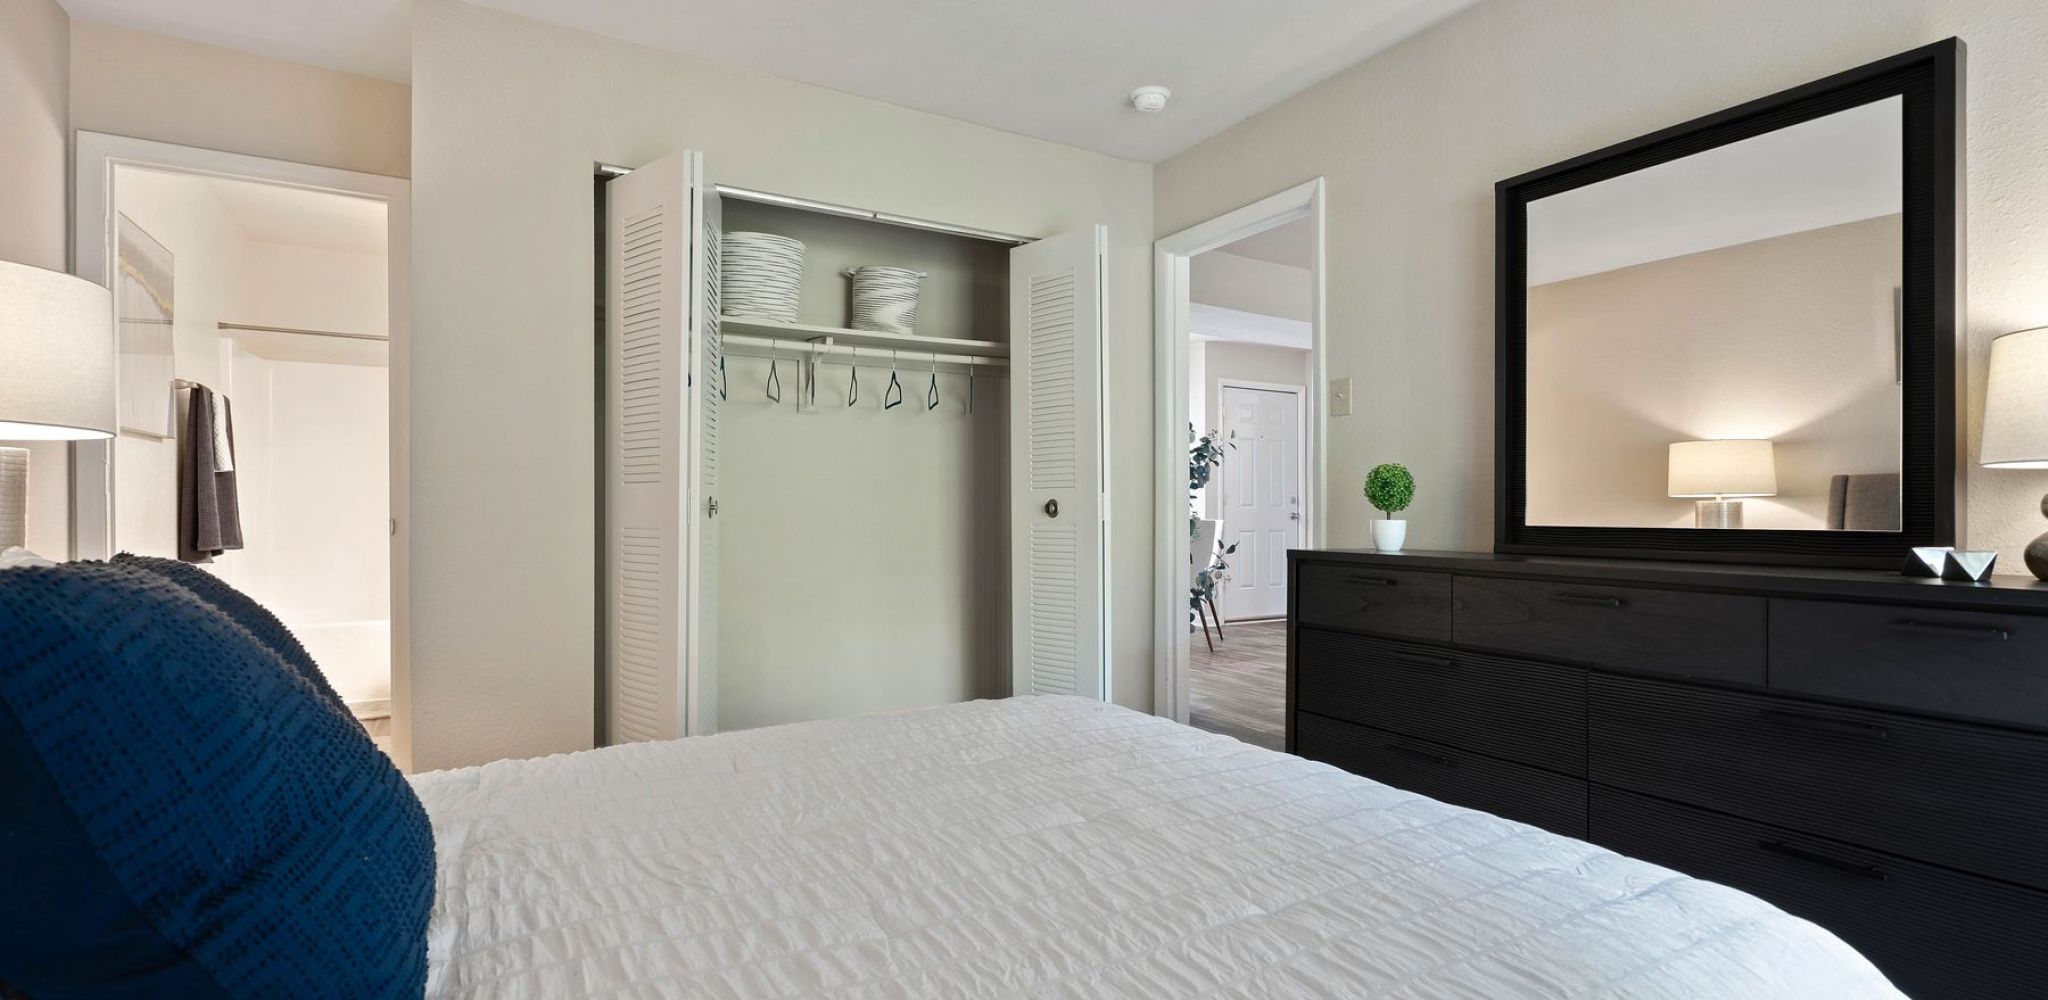 Hawthorne at Oak Ridgespacious apartment bedroom furnished with large bed and en suite bathroom